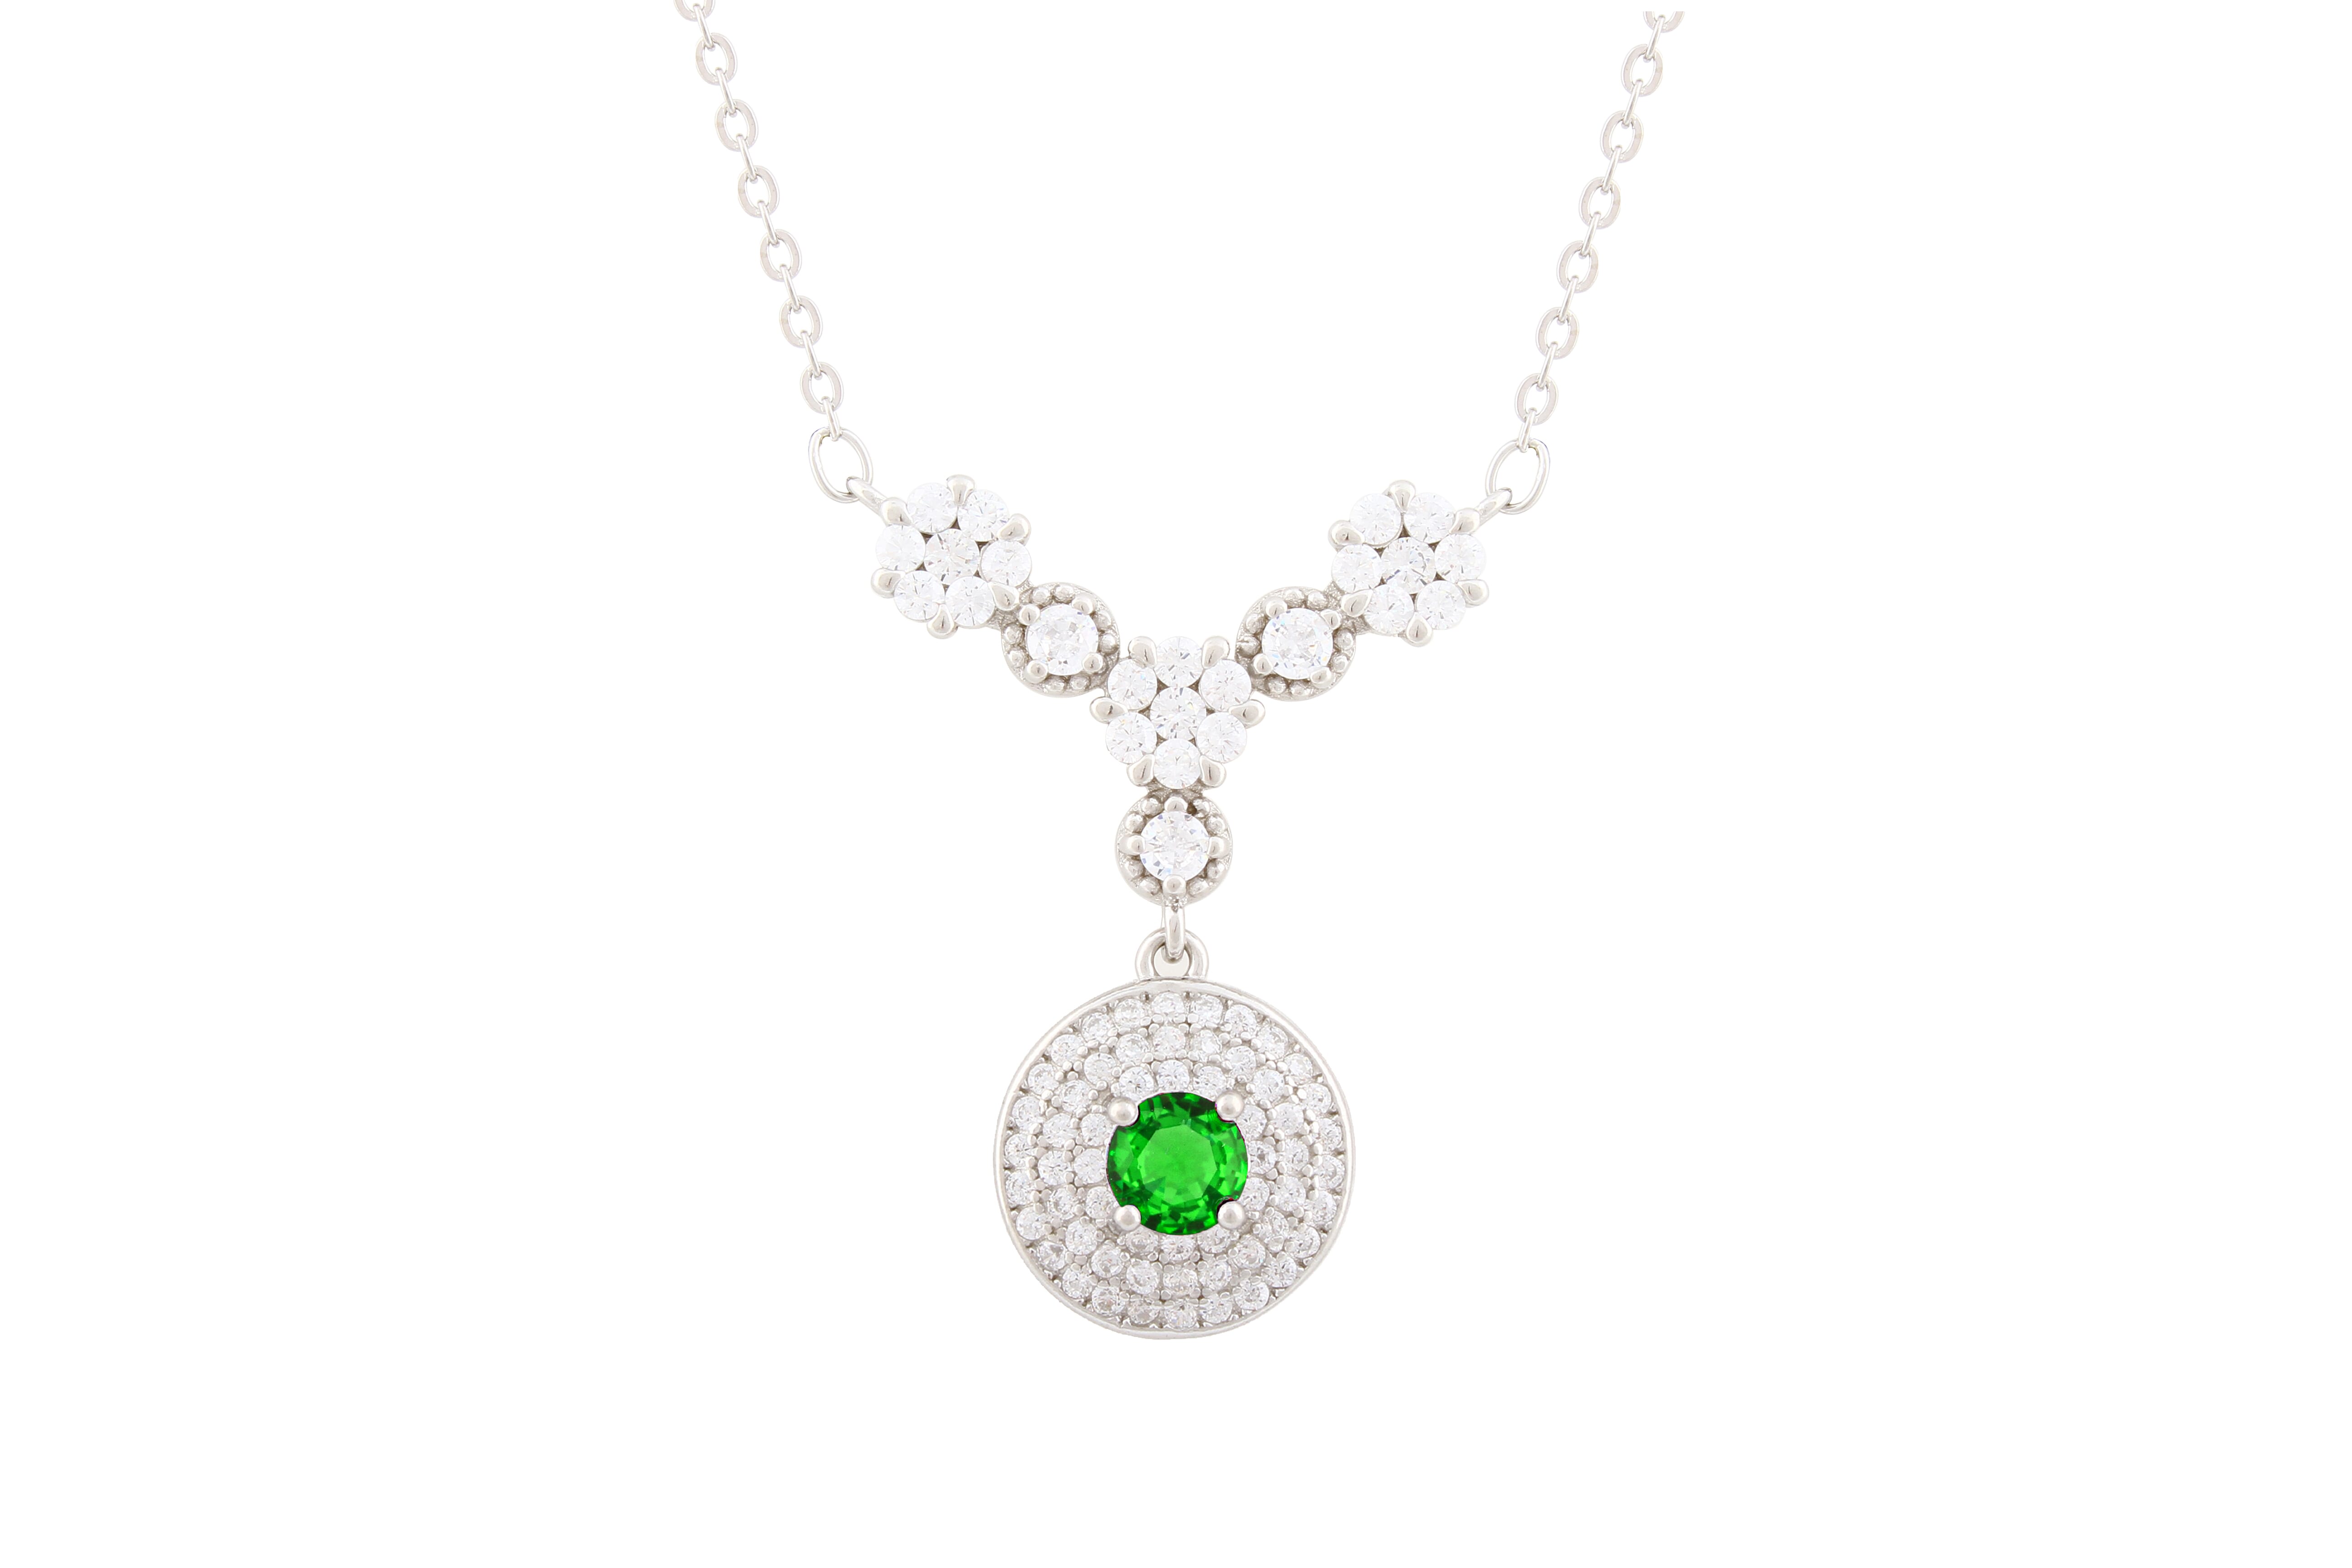 Silver Cluster Necklace With Green Round Pendant